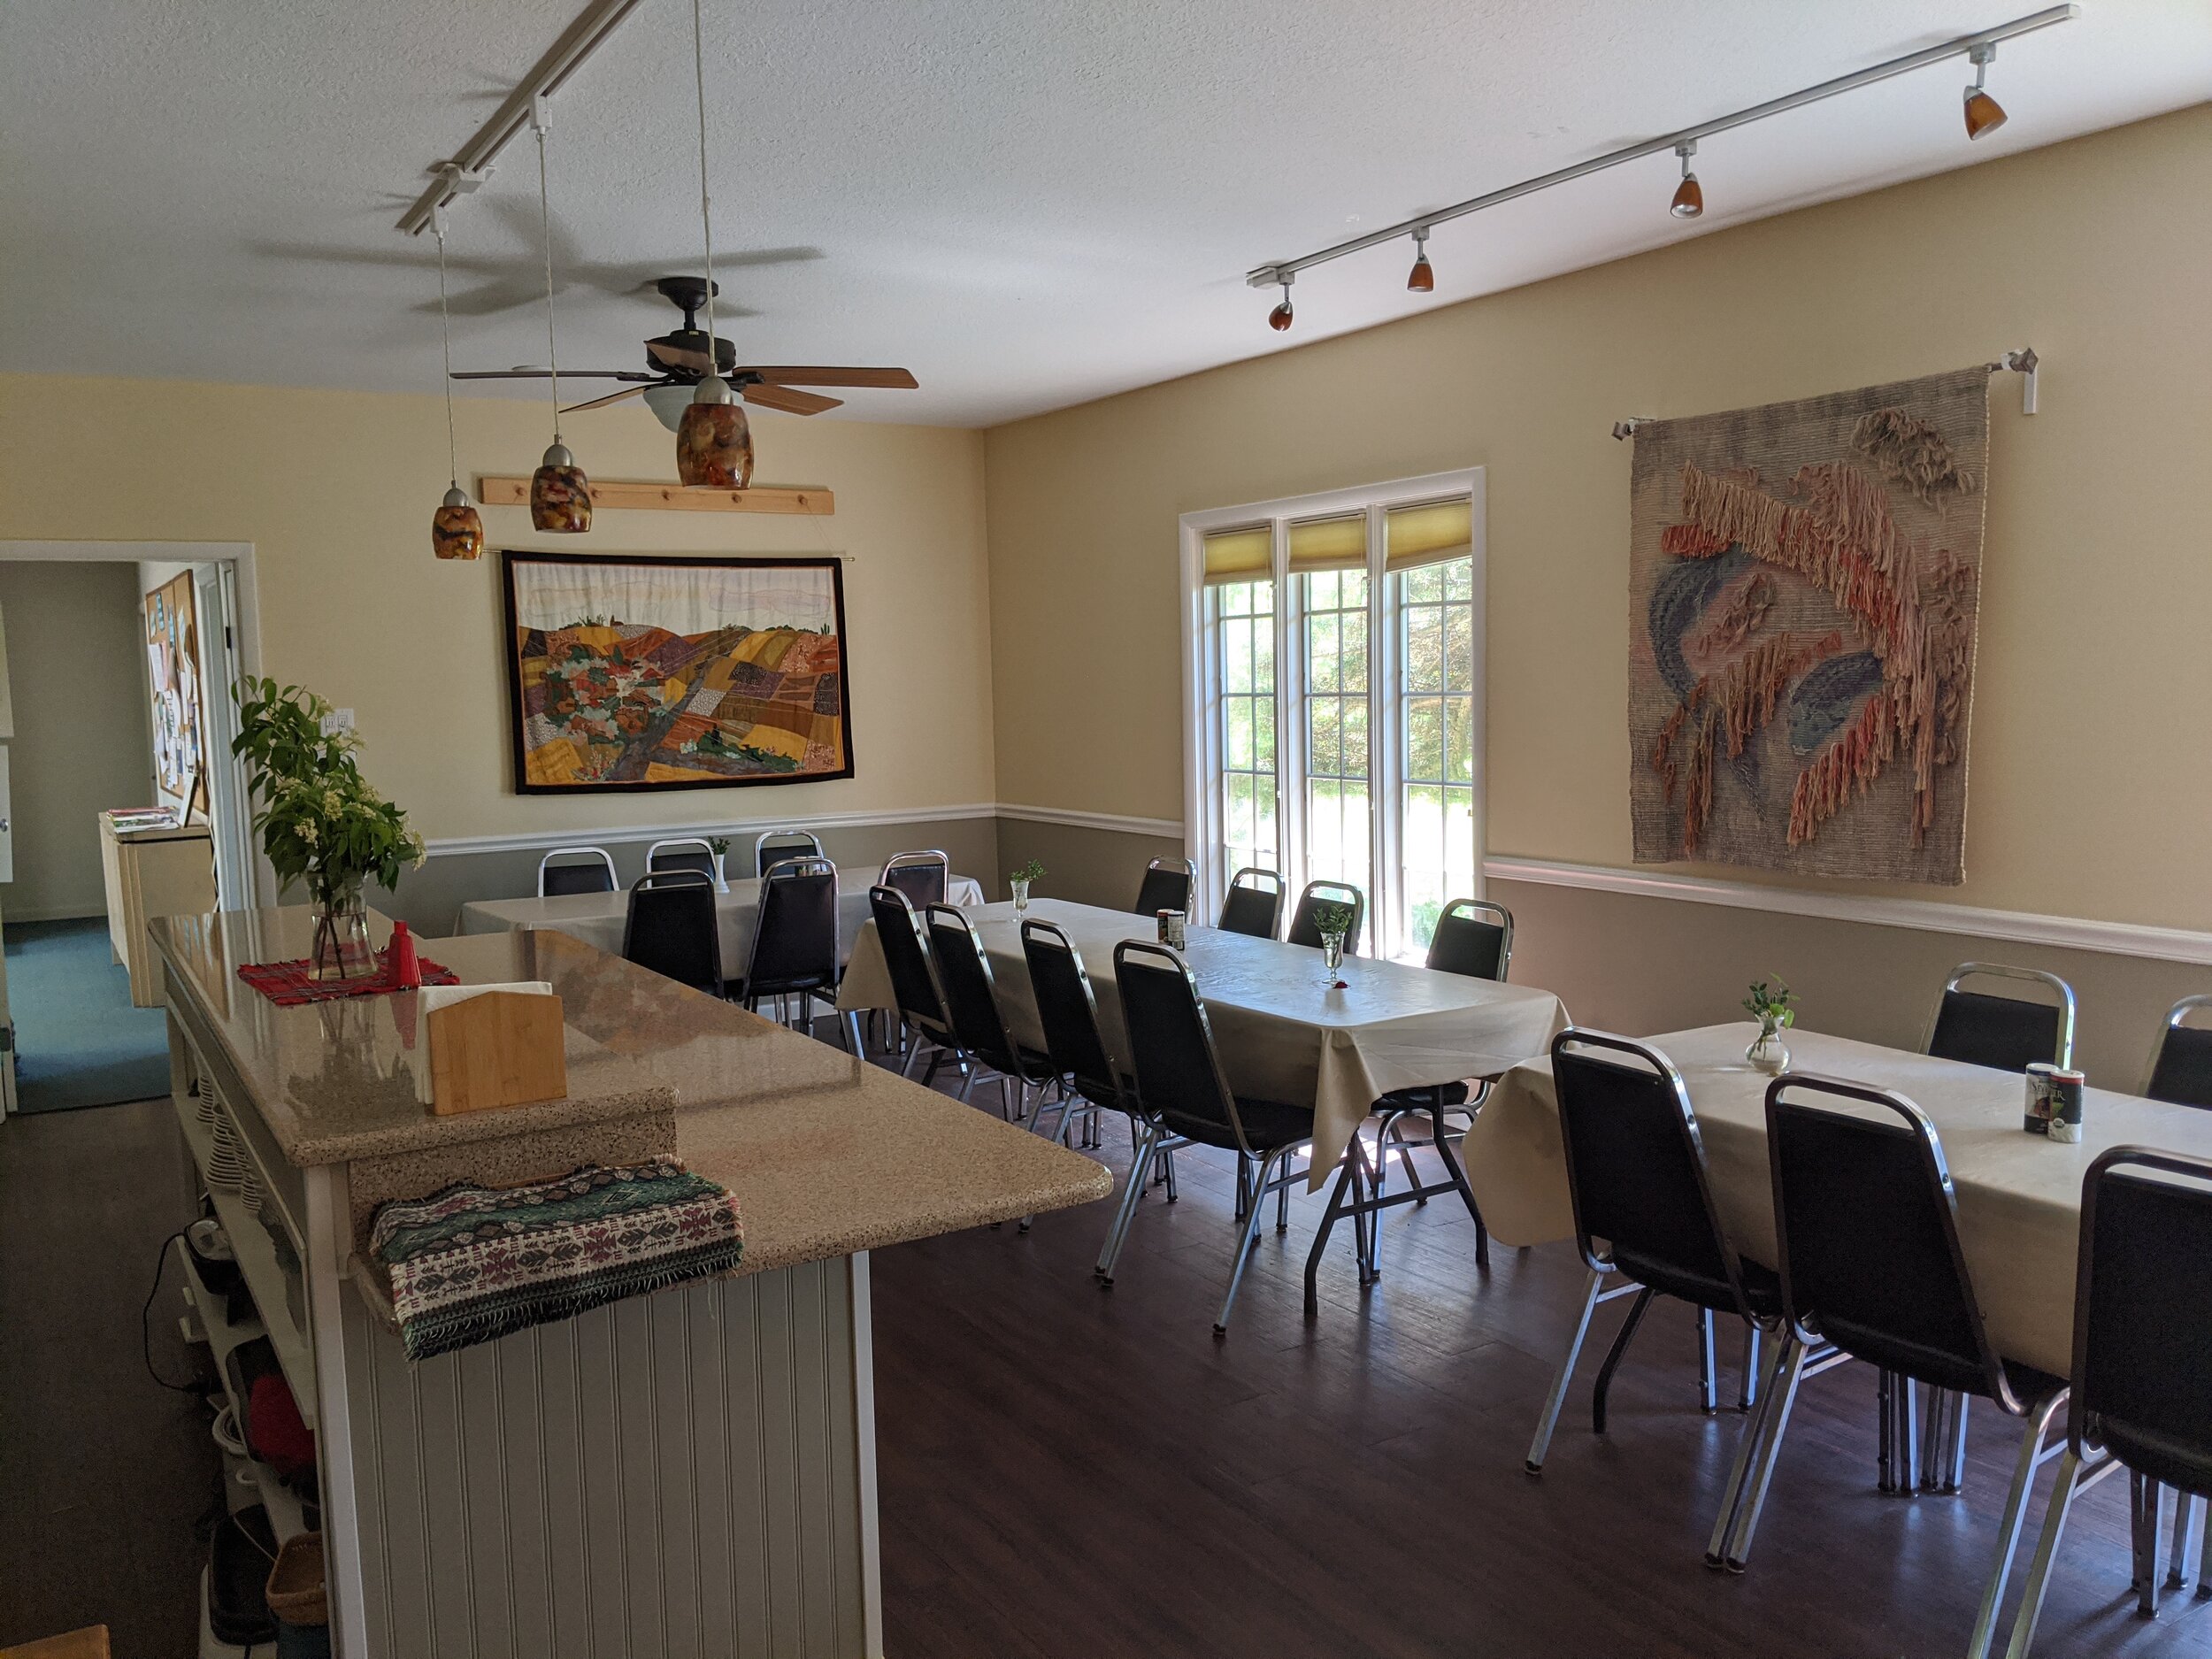 Dining Room in the Community Center